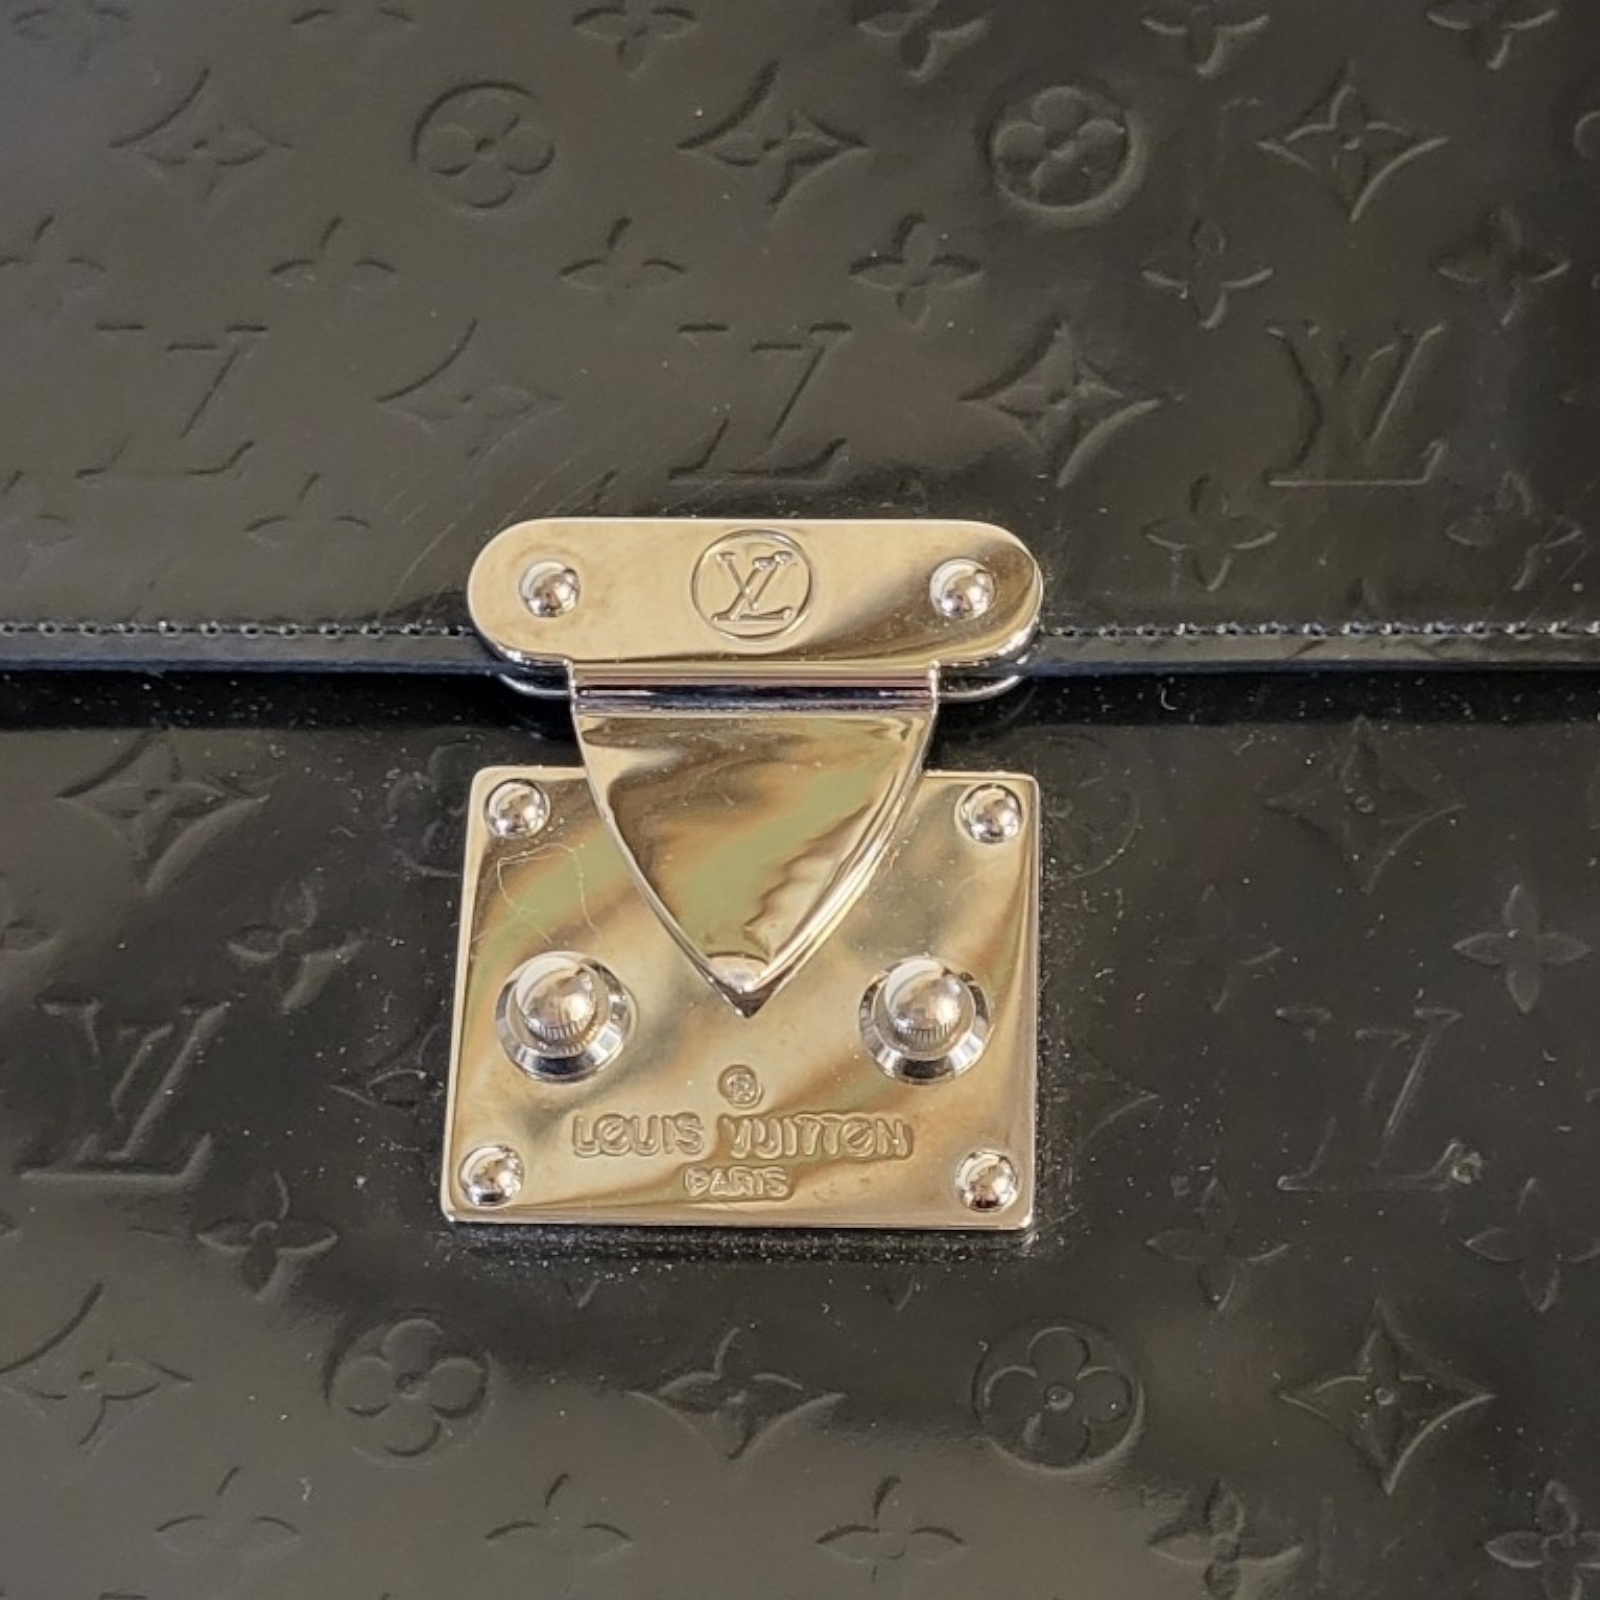 LOUIS VUITTON, A BLACK LEATHER HANDBAG Having a single handle and LV monogram design, in a brown - Image 4 of 9